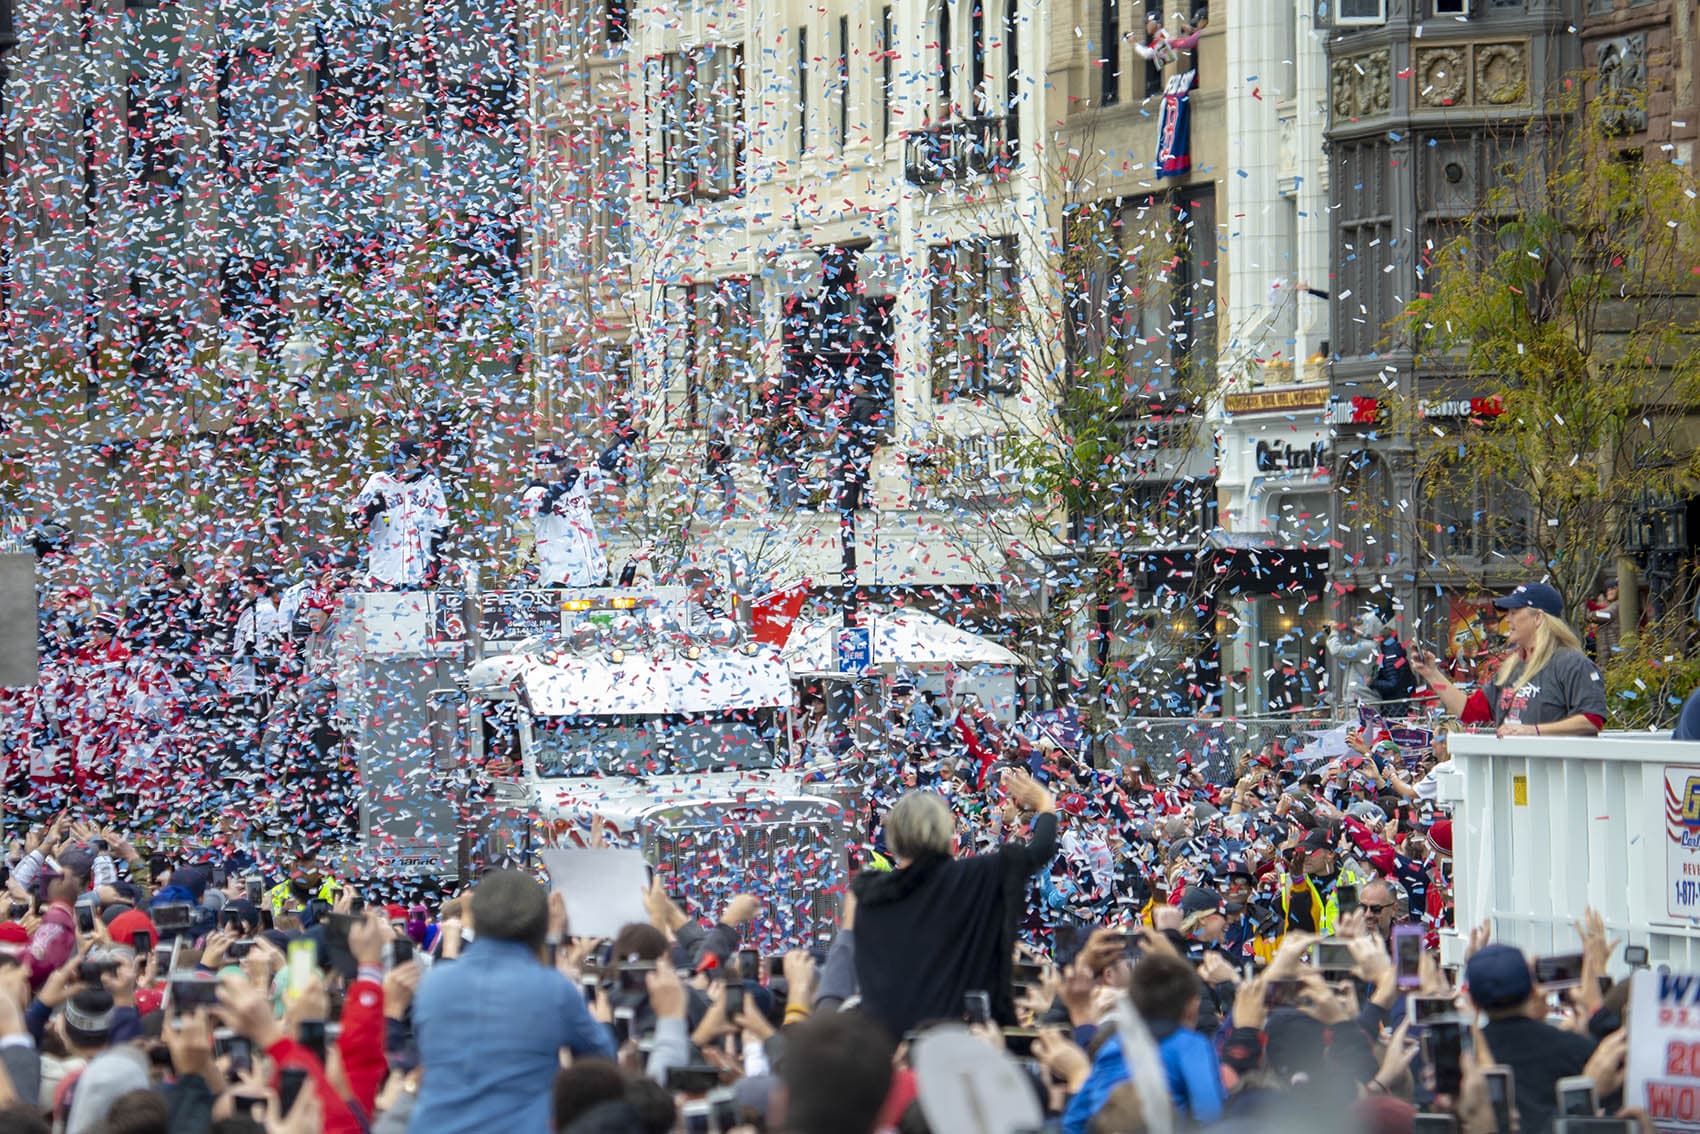 Fans cheer and confetti flies in the air as the Red Sox World Series victory Rolling Rally enters Copley Square on Boylston Street. (Jesse Costa/WBUR)